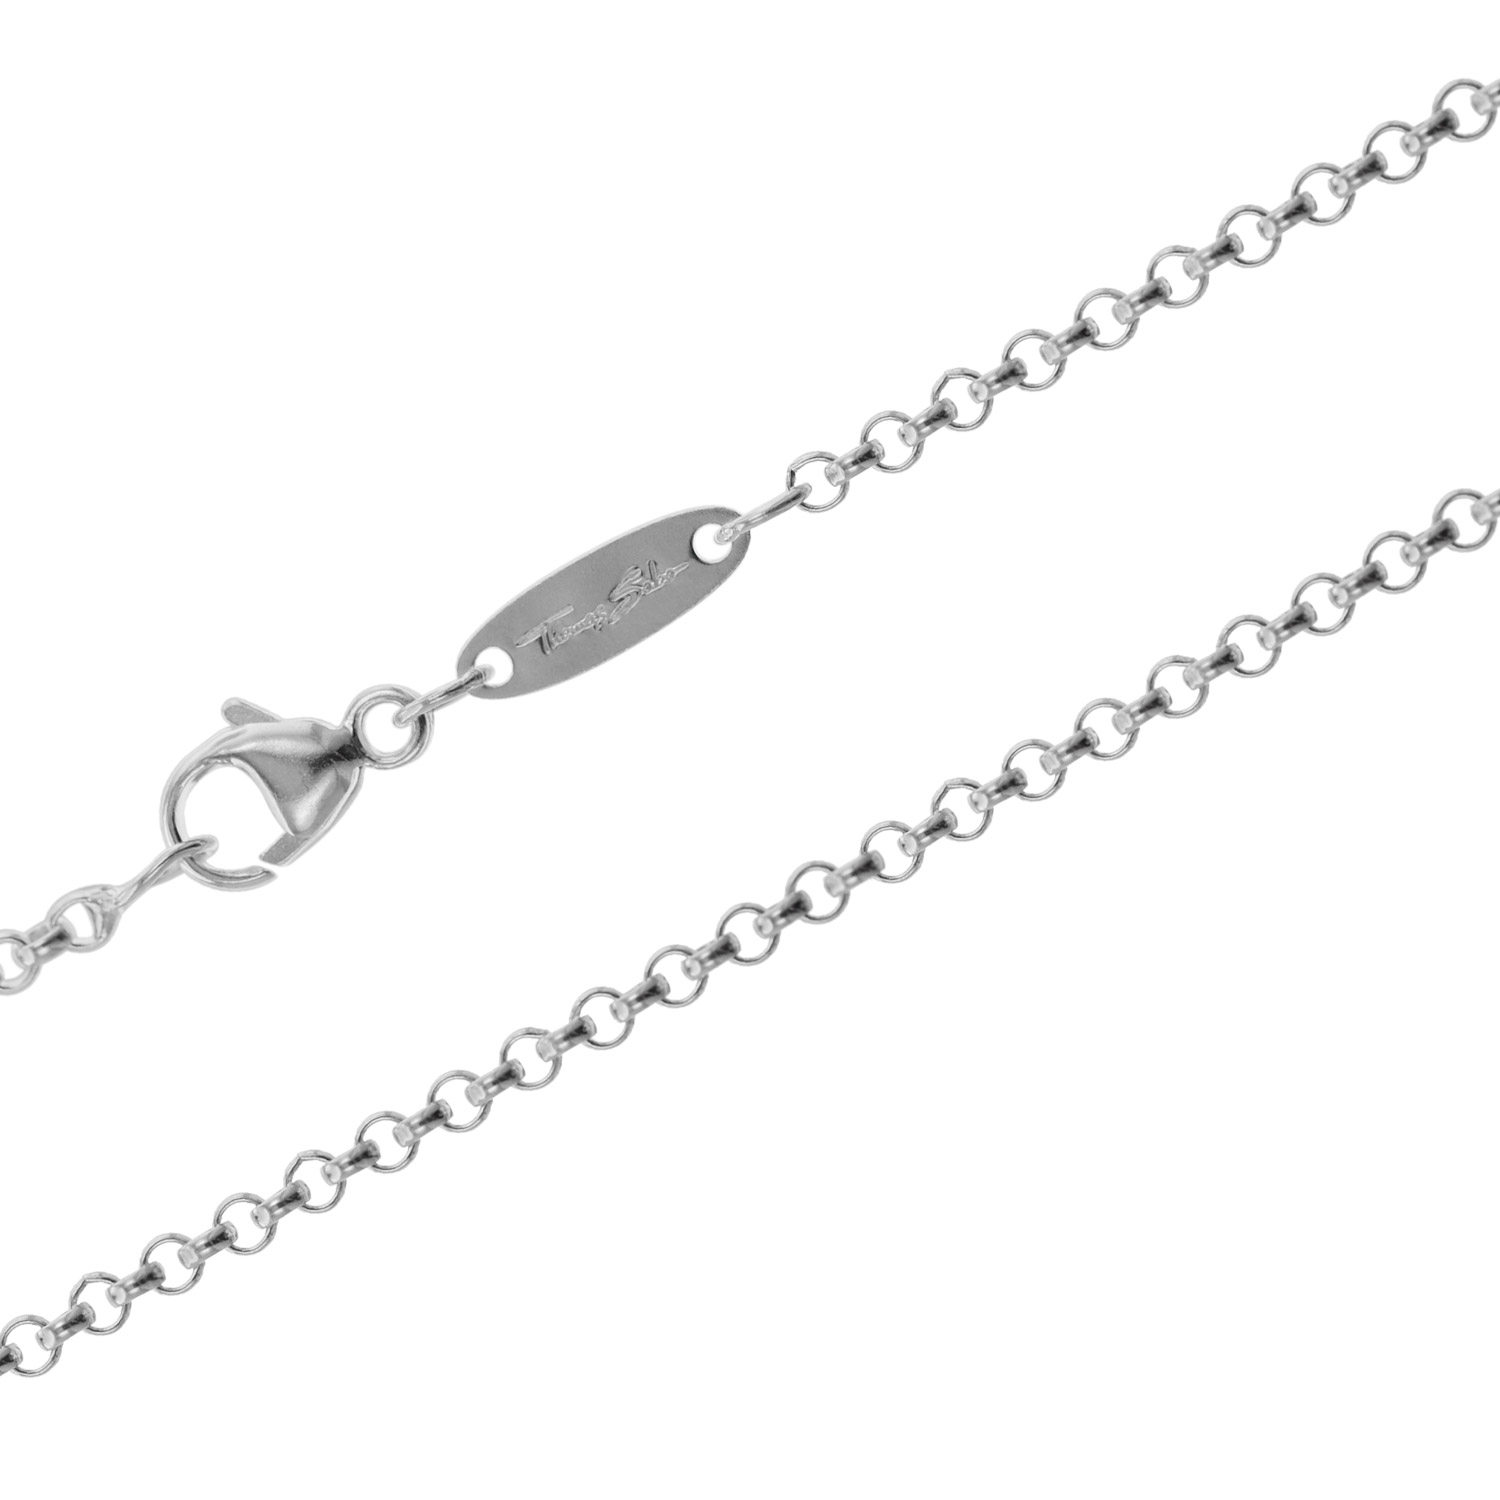 Thomas • Ladies X0001-001-12 for Sabo Charms uhrcenter Necklace